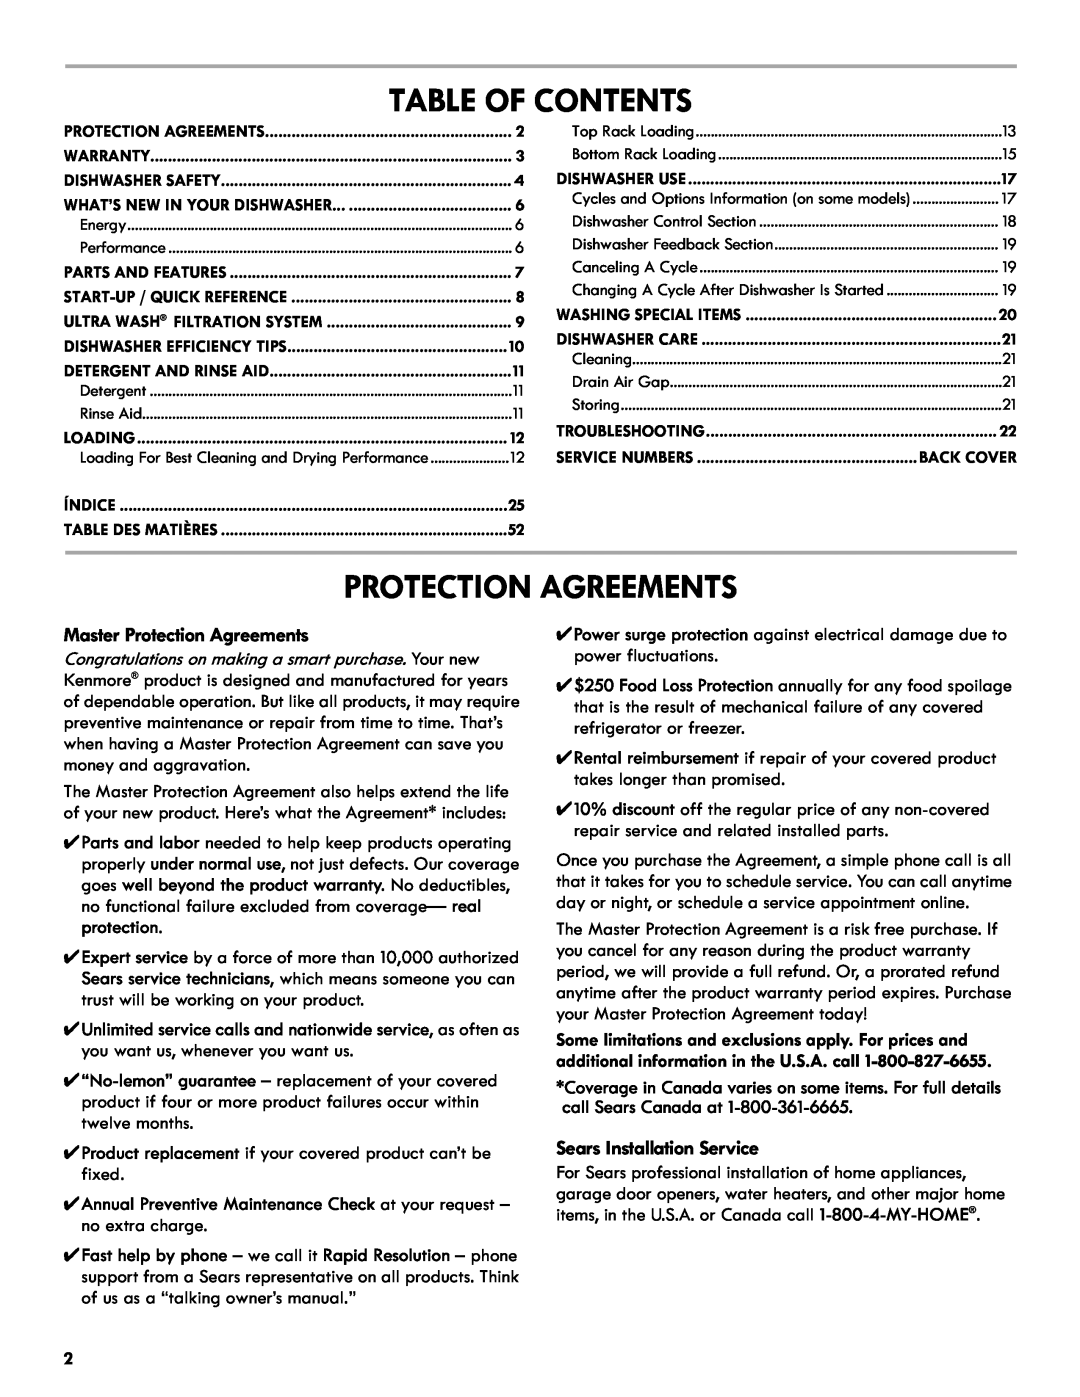 Kenmore 665.1327 manual Table Of Contents, Master Protection Agreements, Sears Installation Service 